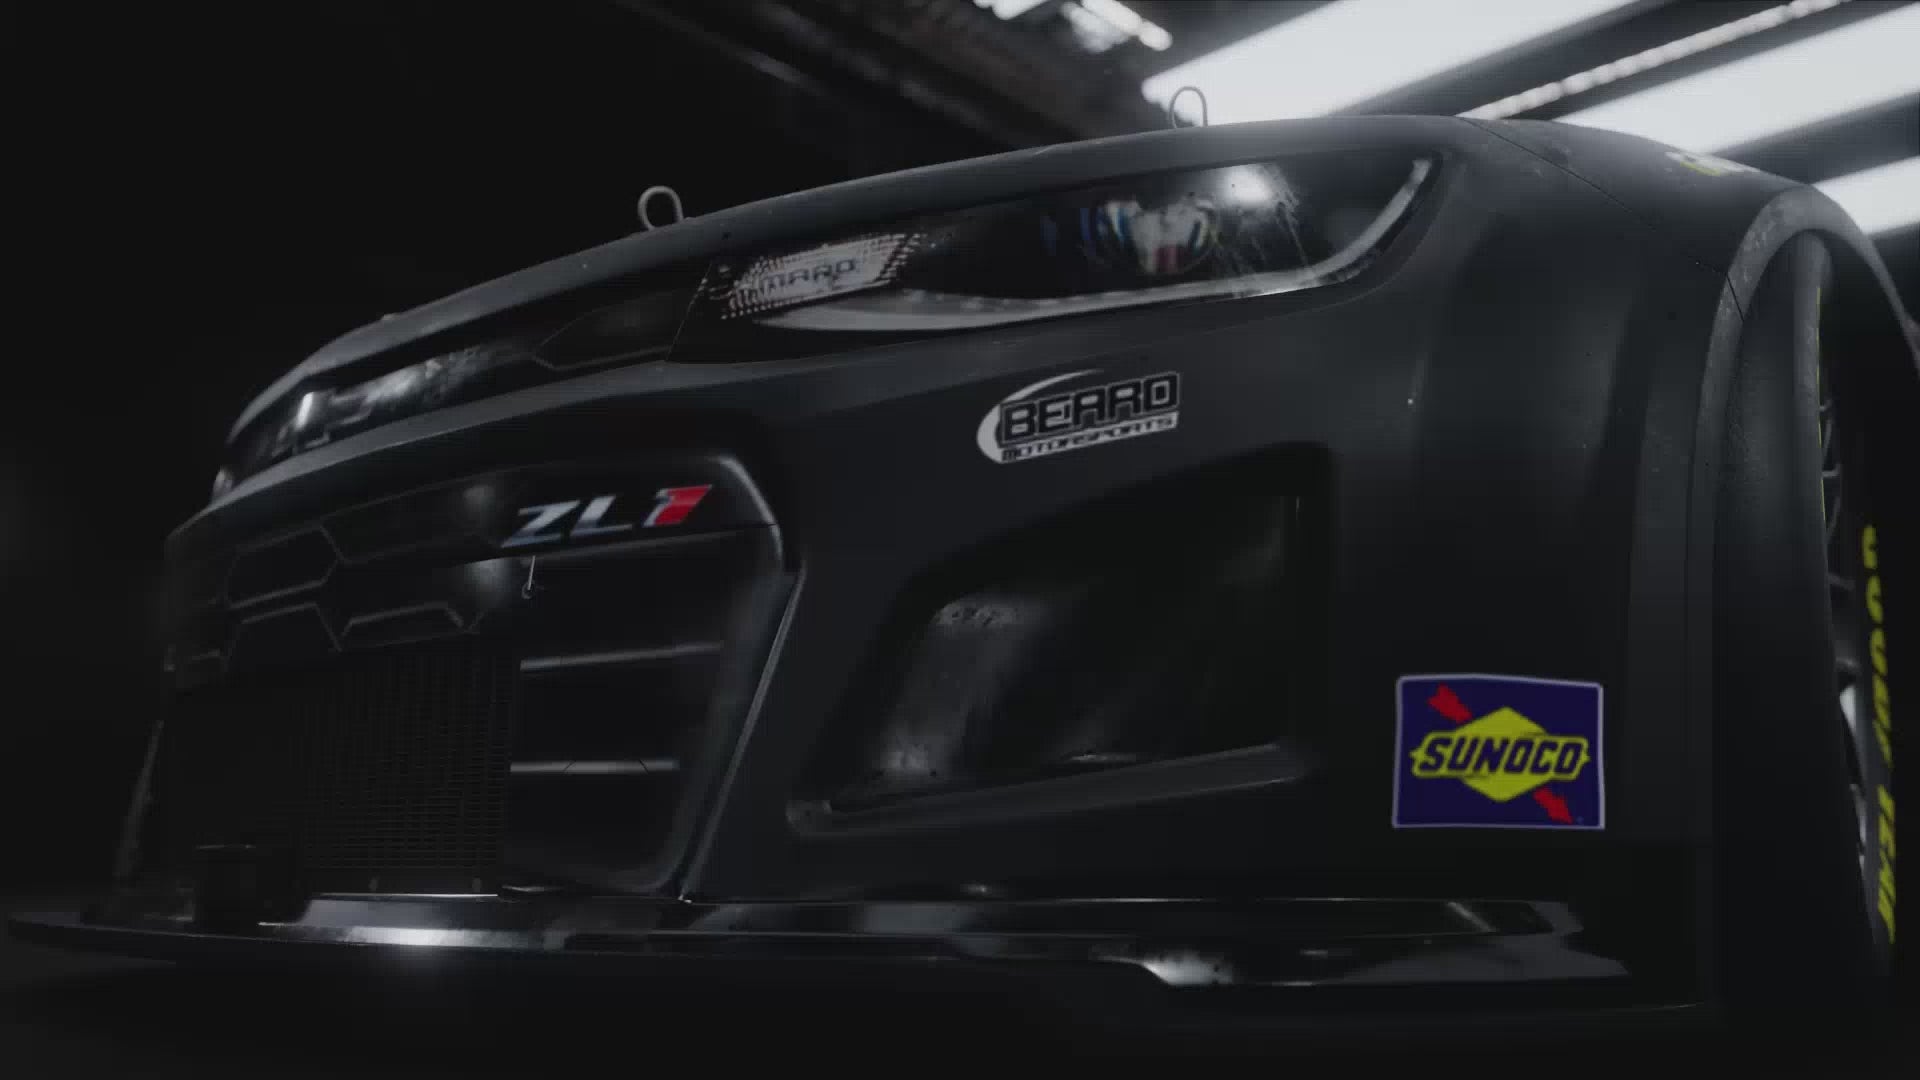 Load video: The official unveiling of the Beard Motorsports No. 62 car for the Daytona 500.